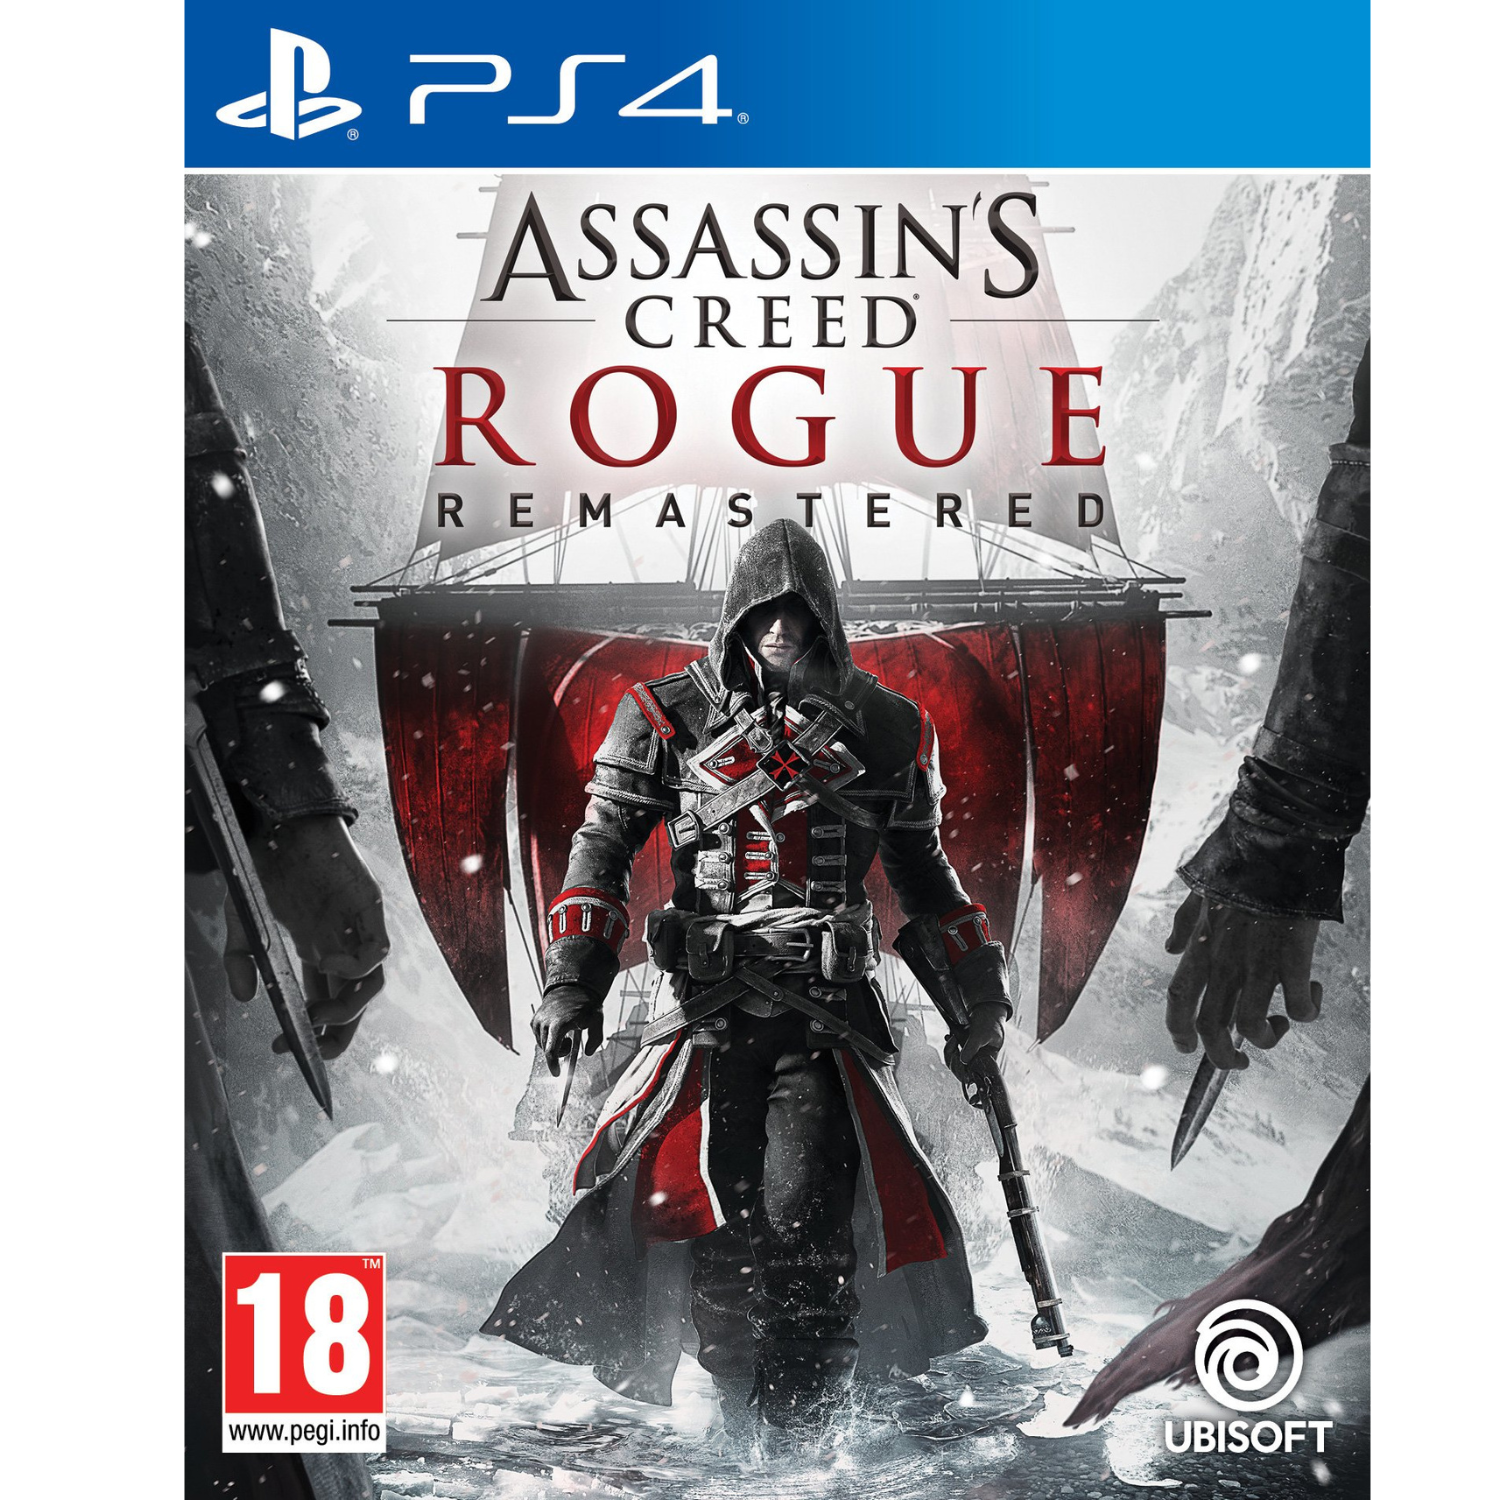 Assassin's Creed Rogue Remastered Ps4